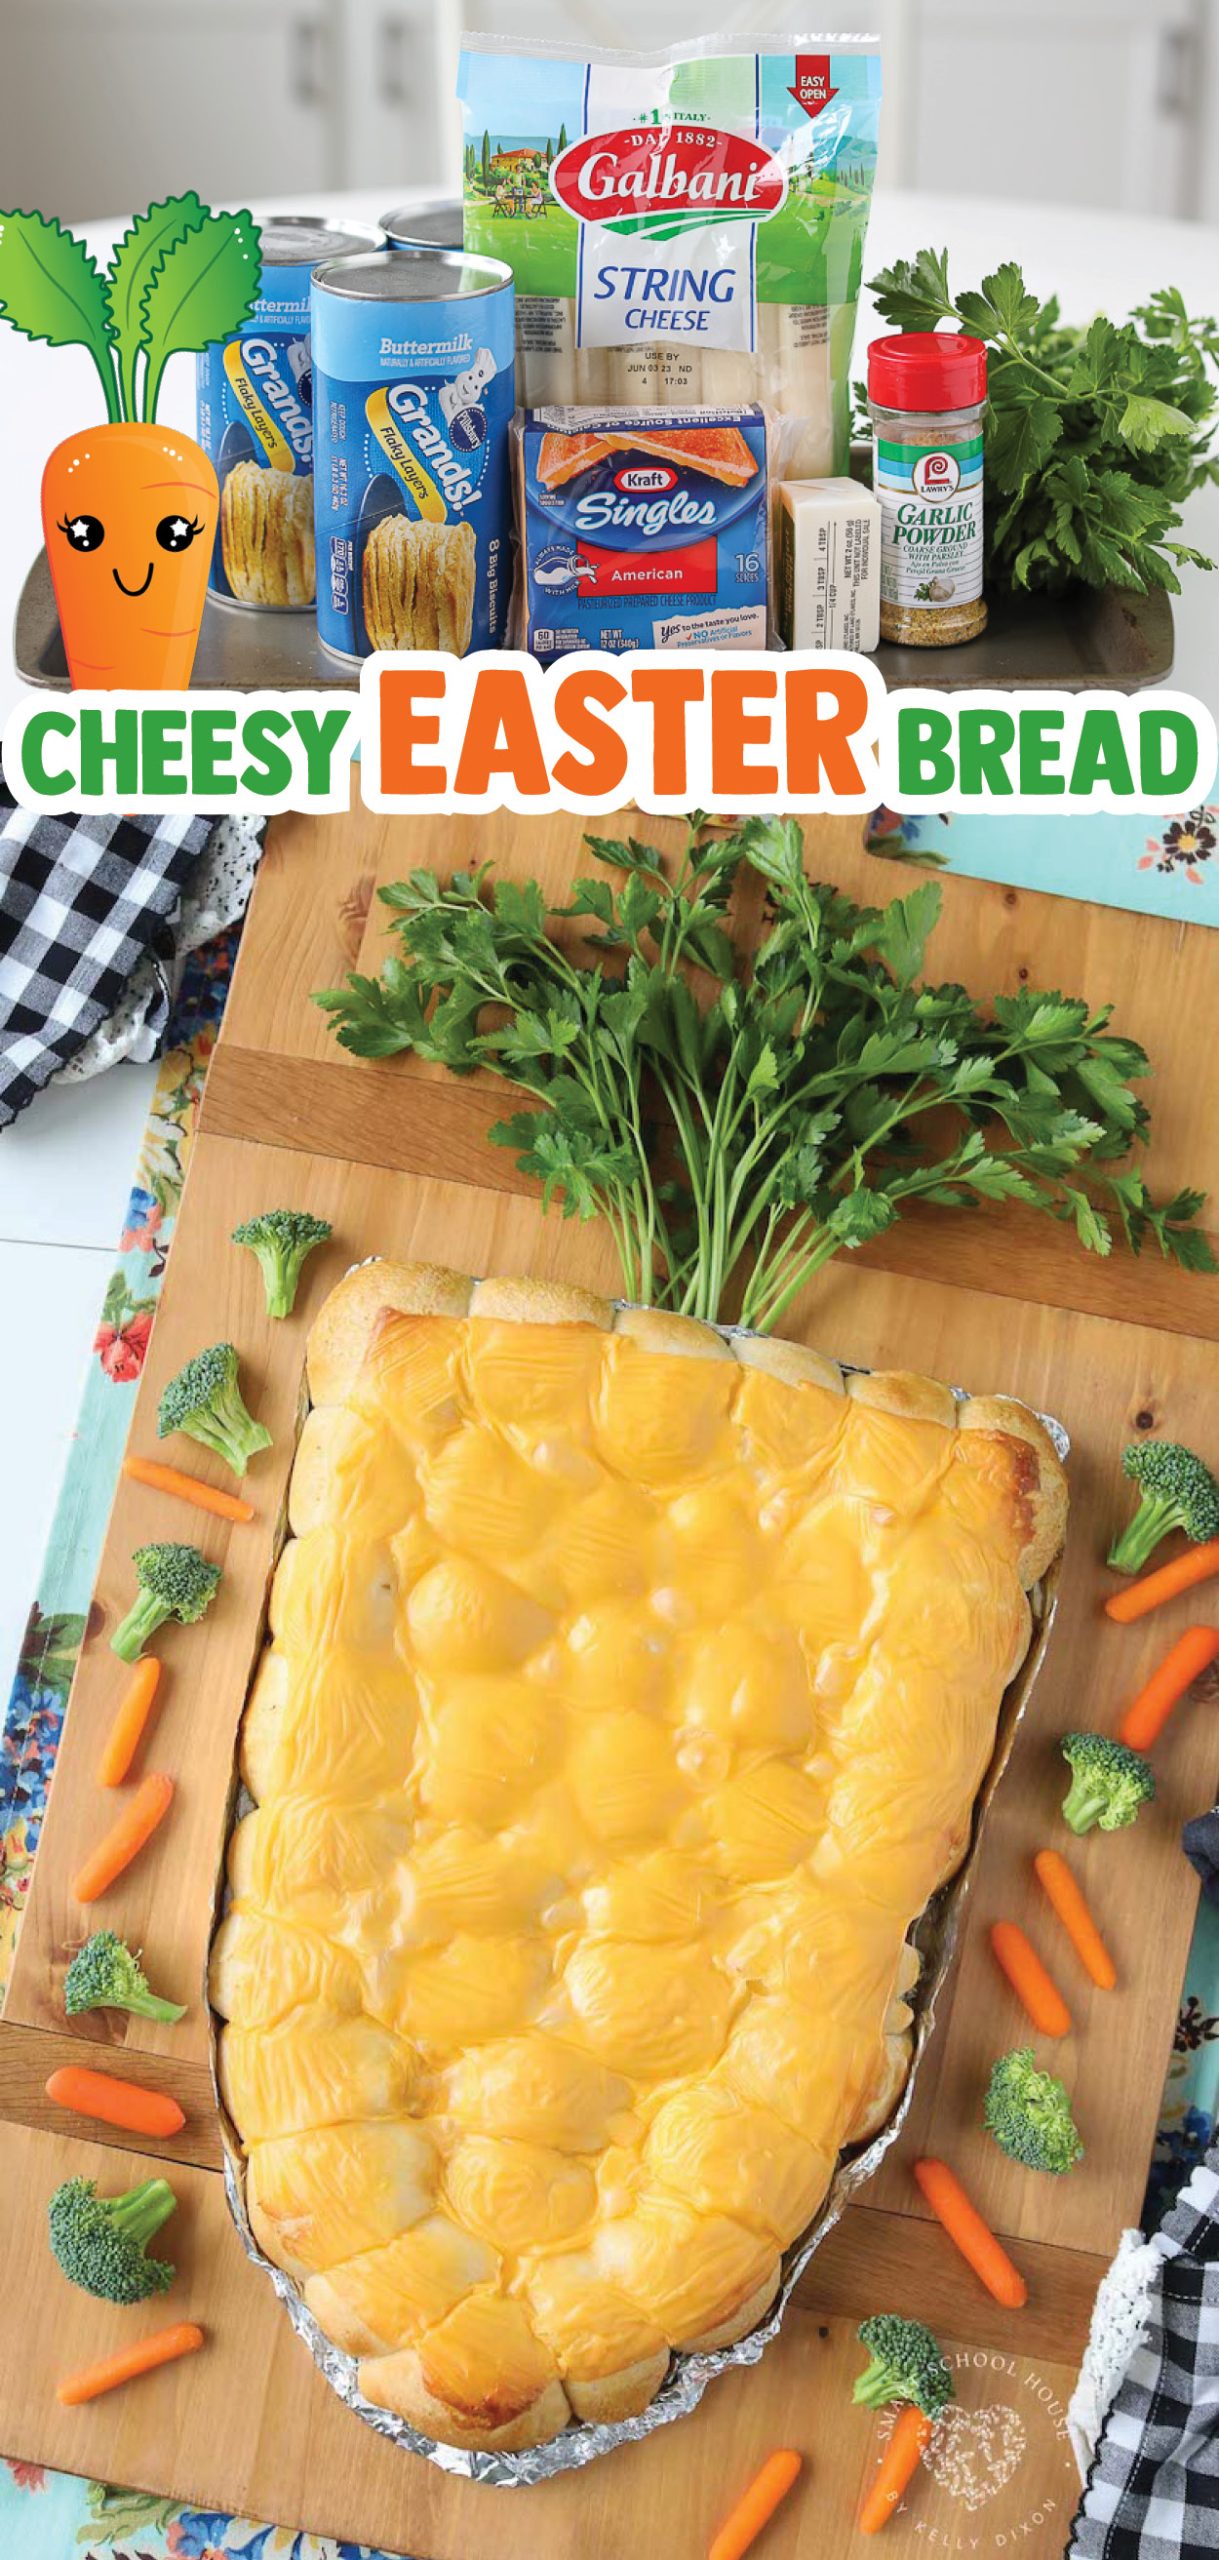 Cheesy Carrot Shaped Pull Apart Bread is made of everyone's favorite buttery biscuits rolled around cheese and shaped into an Easter carrot.